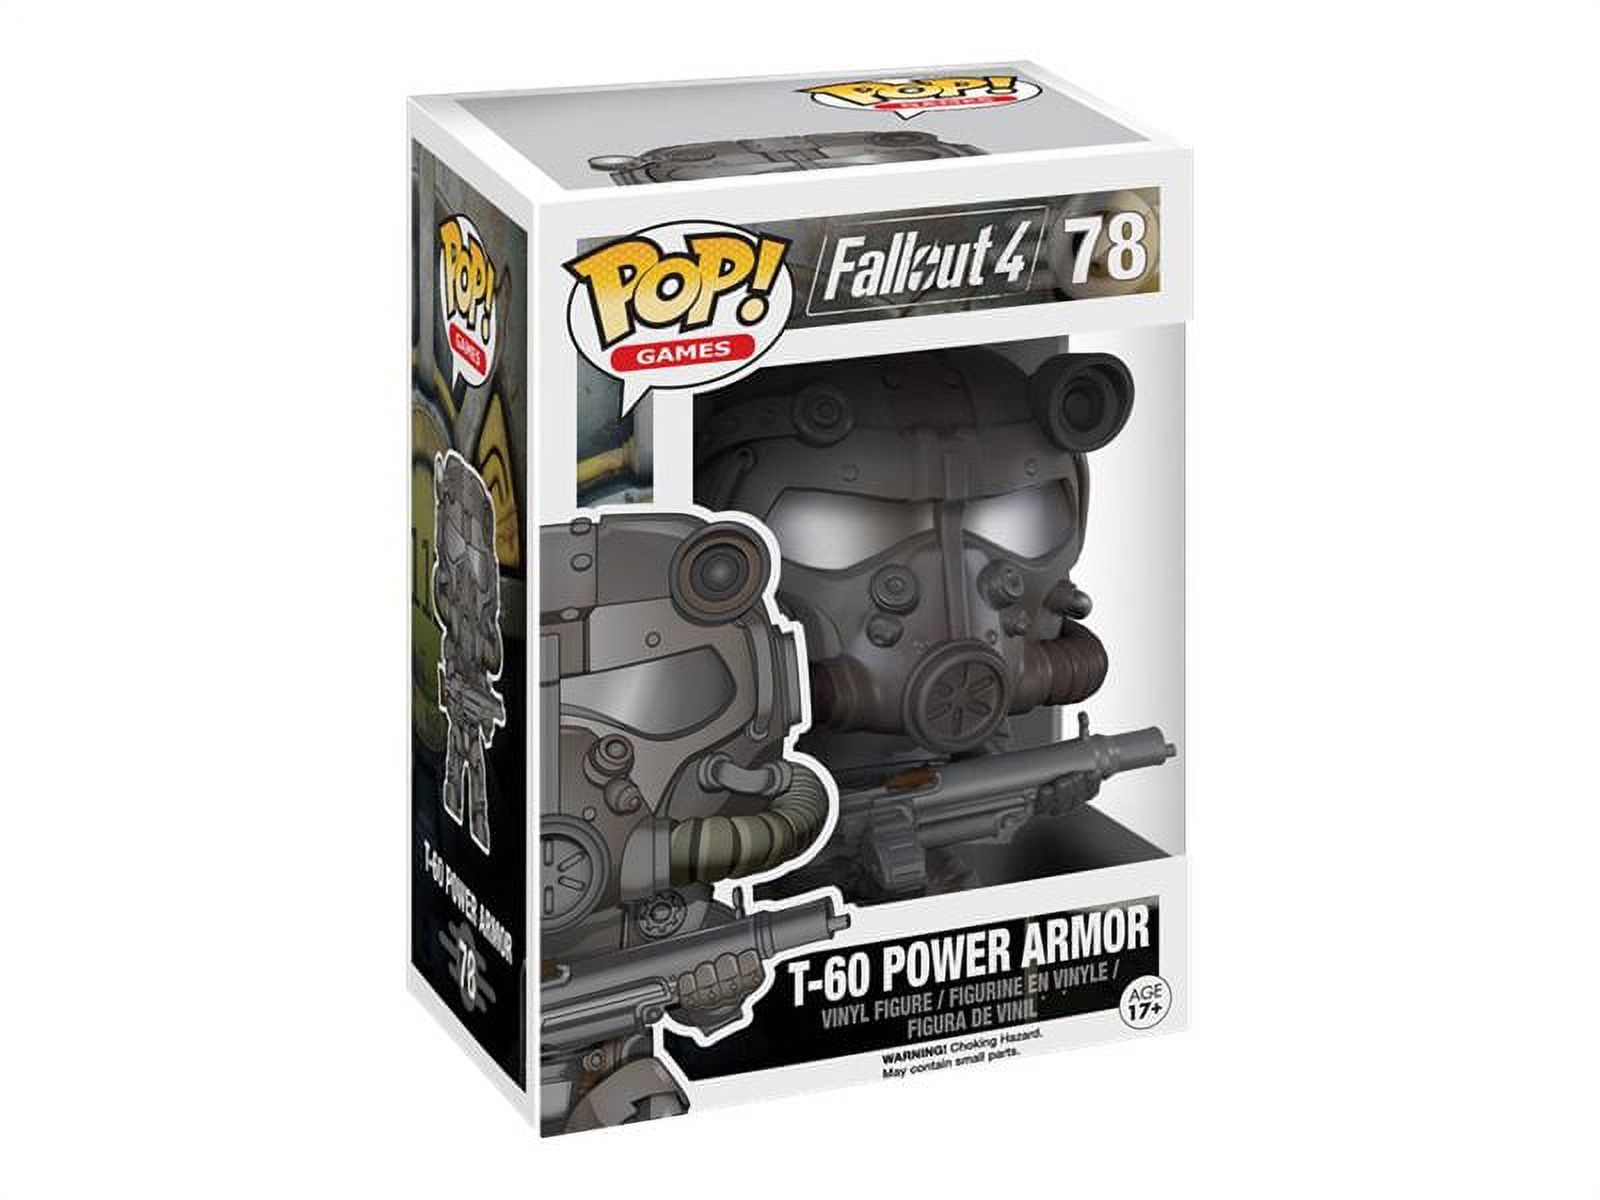 Toy - POP - Vinyl Figure - Fallout 4 - T-60 Power Armor (Gift Idea) - image 2 of 2